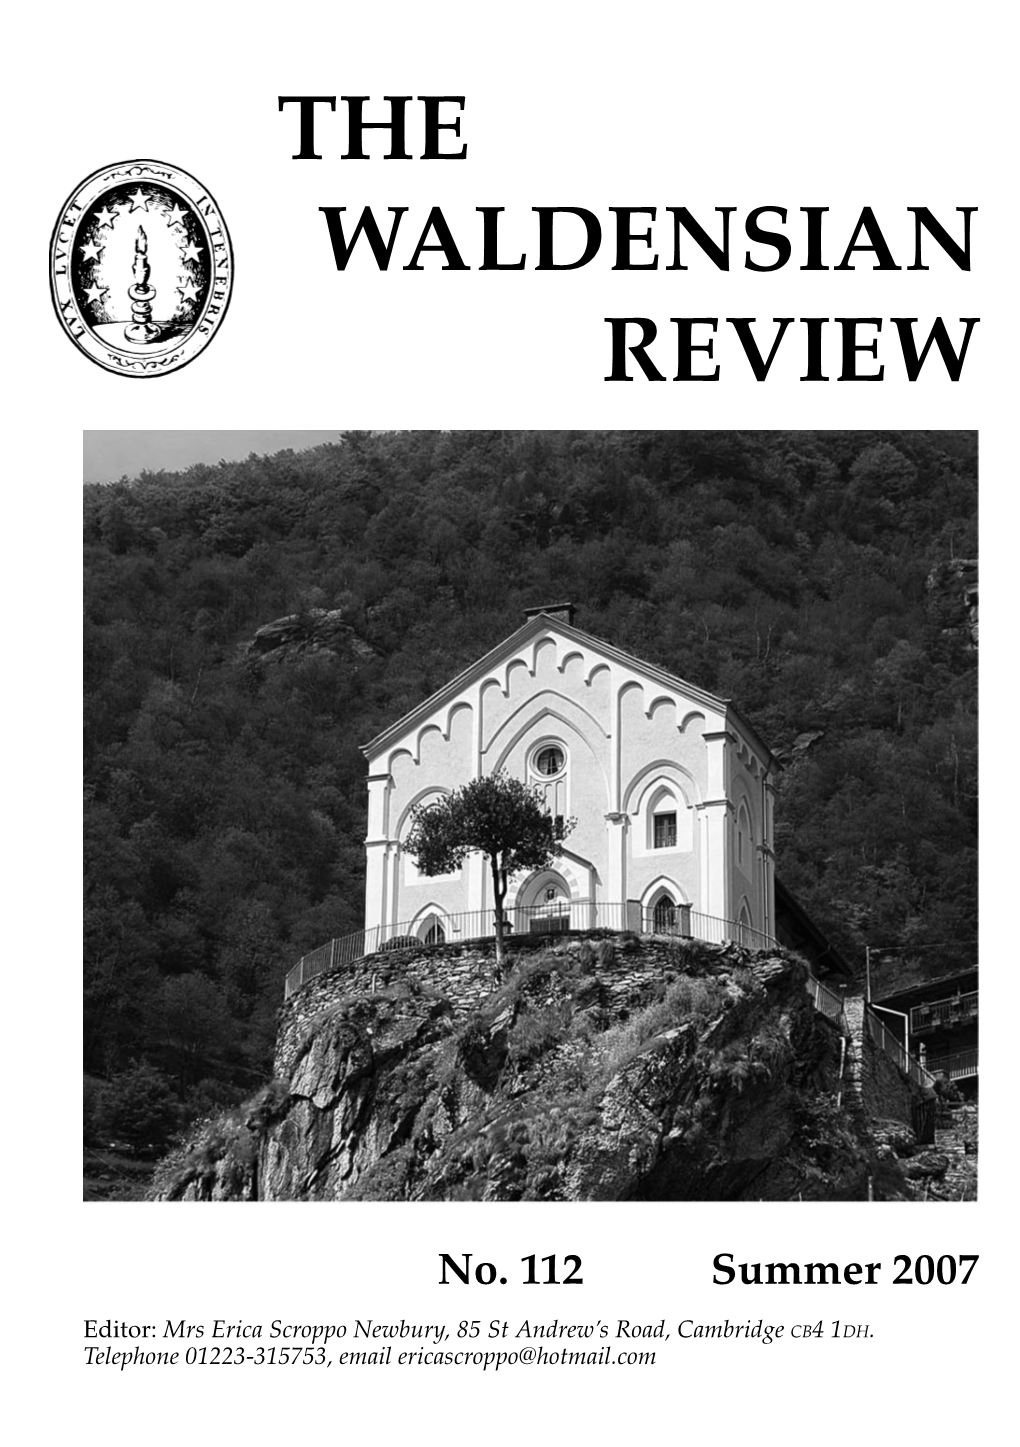 The Waldensian Review